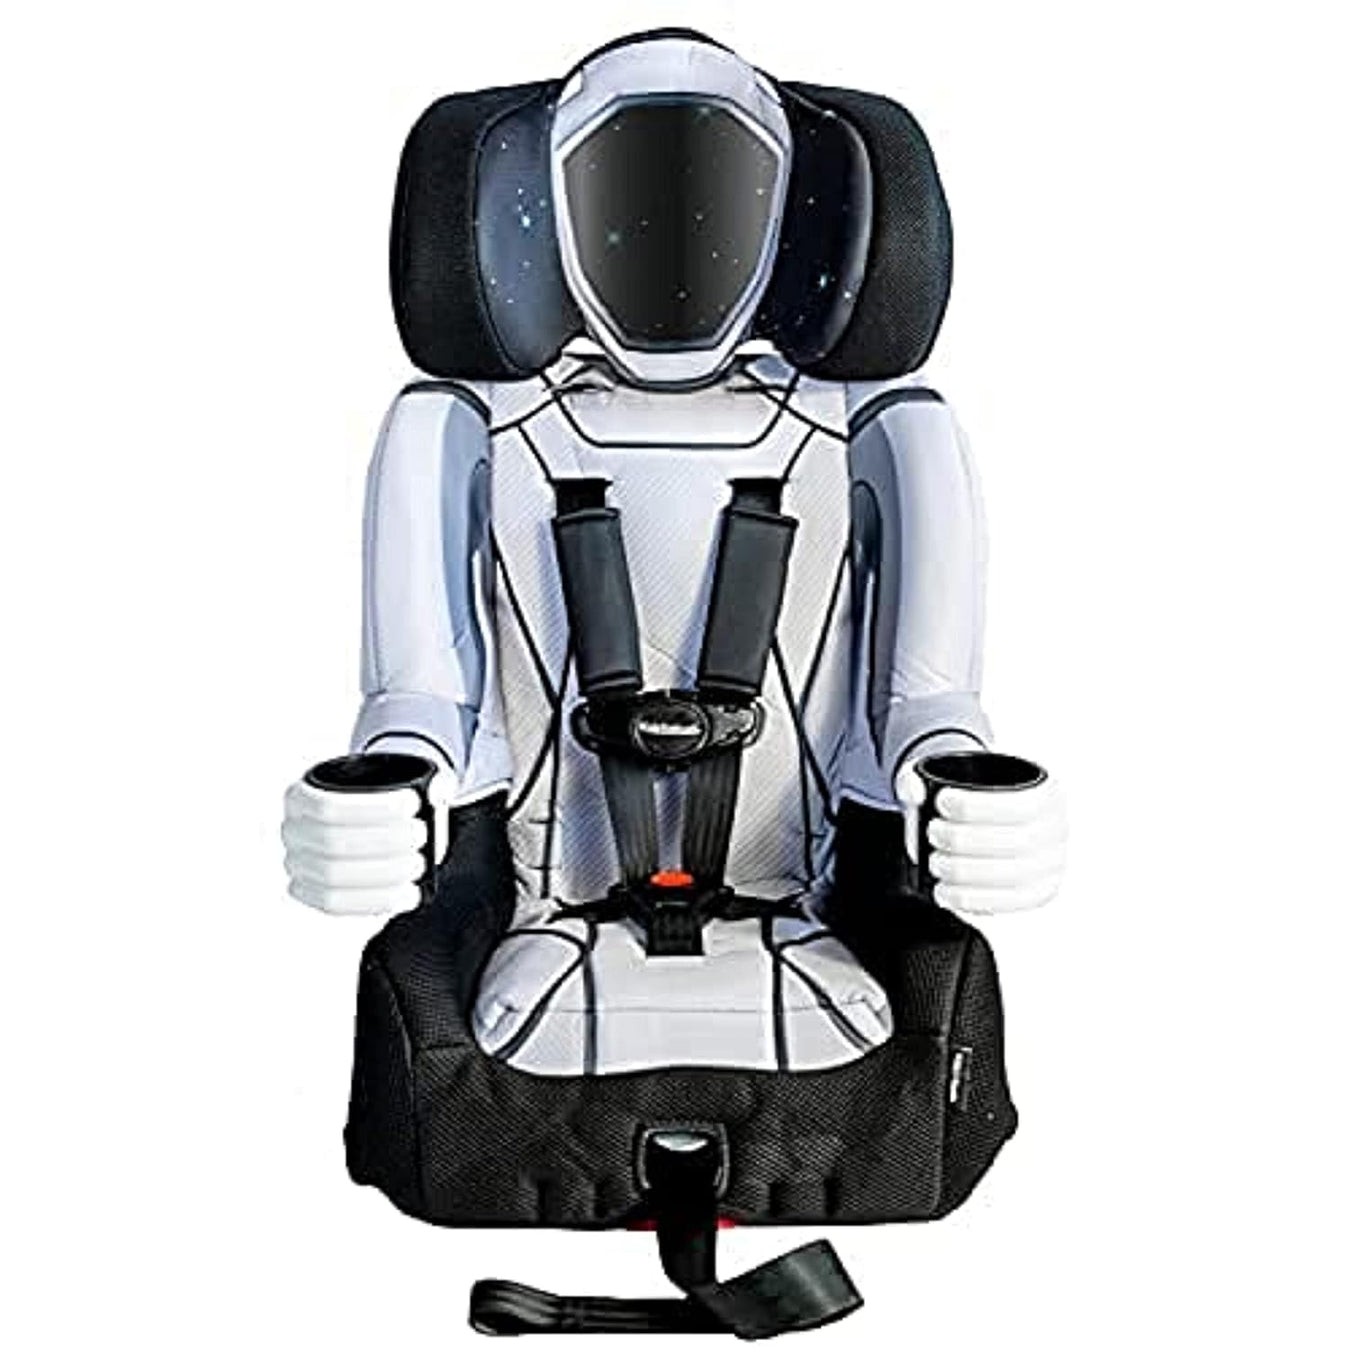 2-in-1 Combination Harness/Booster Car Seats